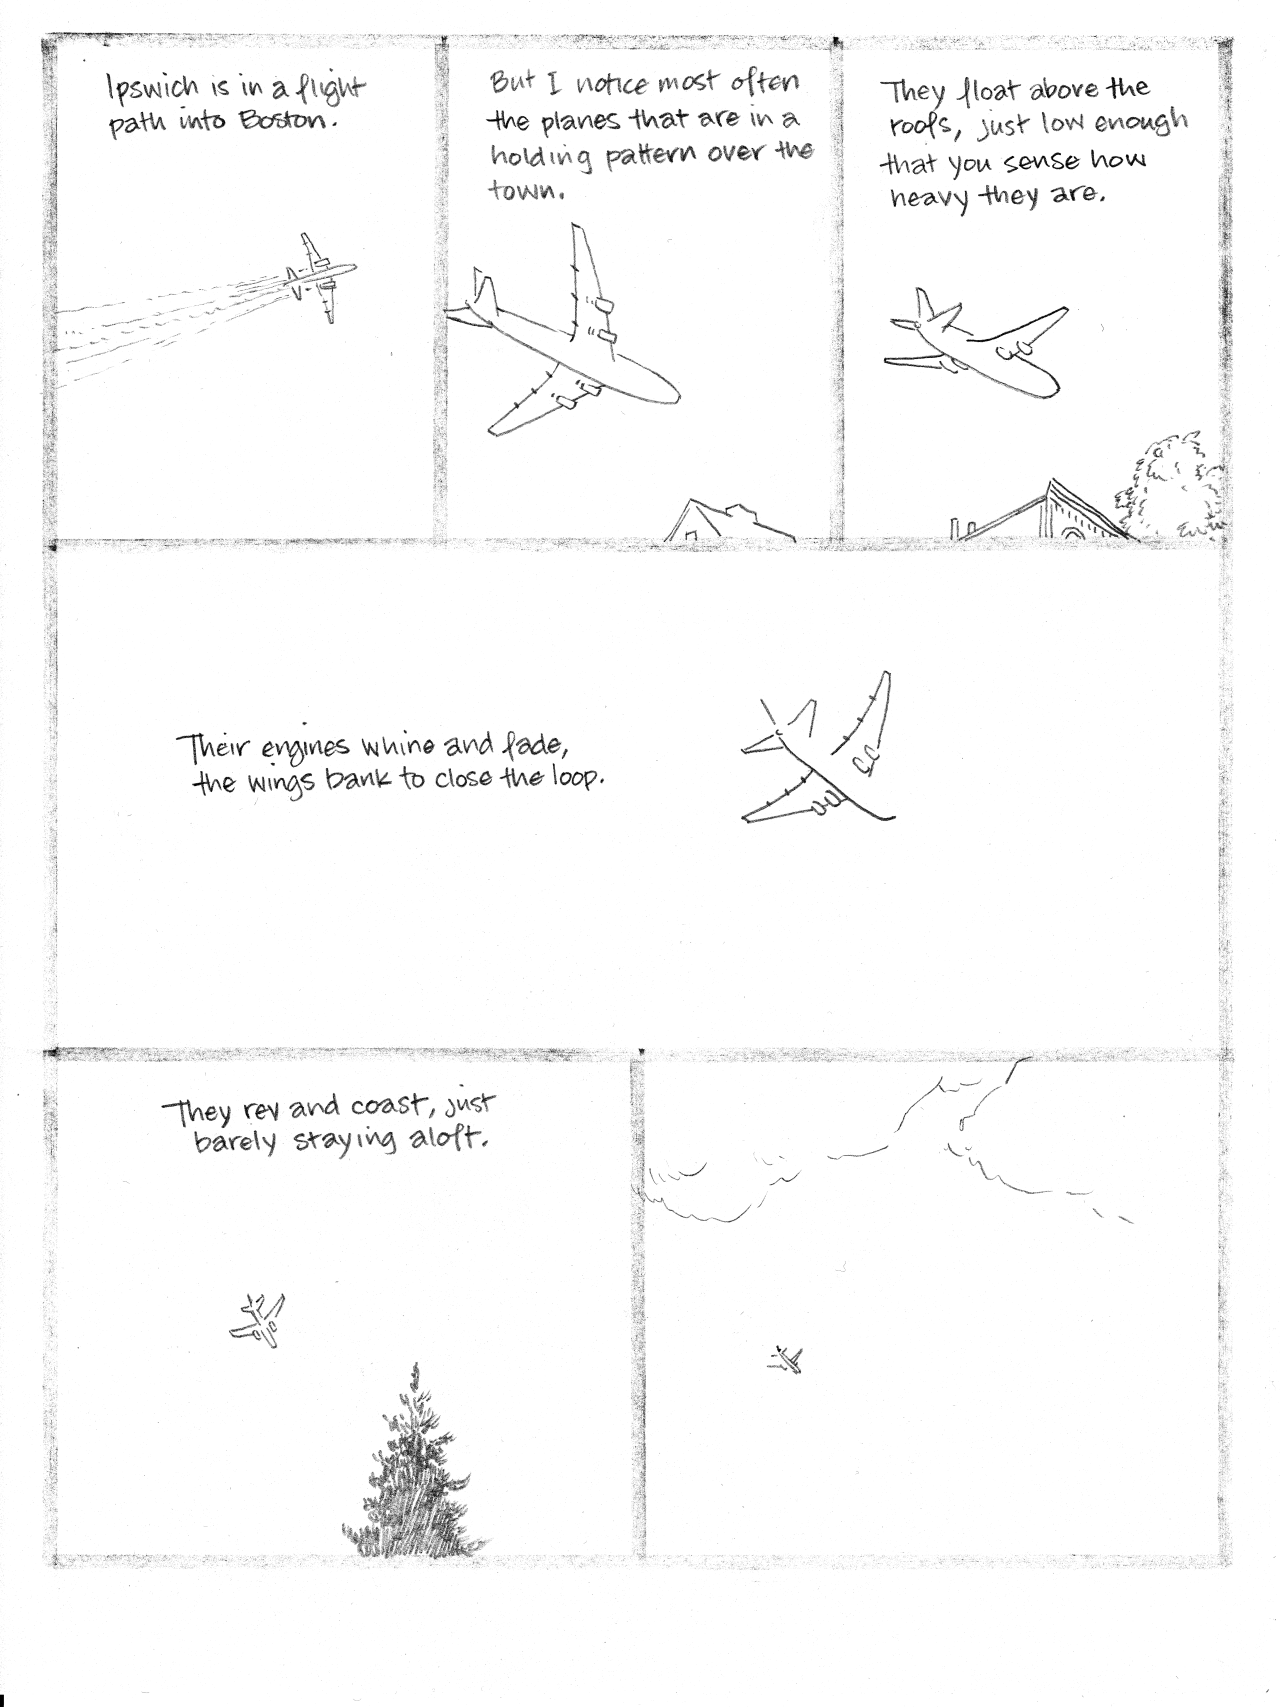 In Pieces: Someplace Which I Call Home (2/4) - Page 1